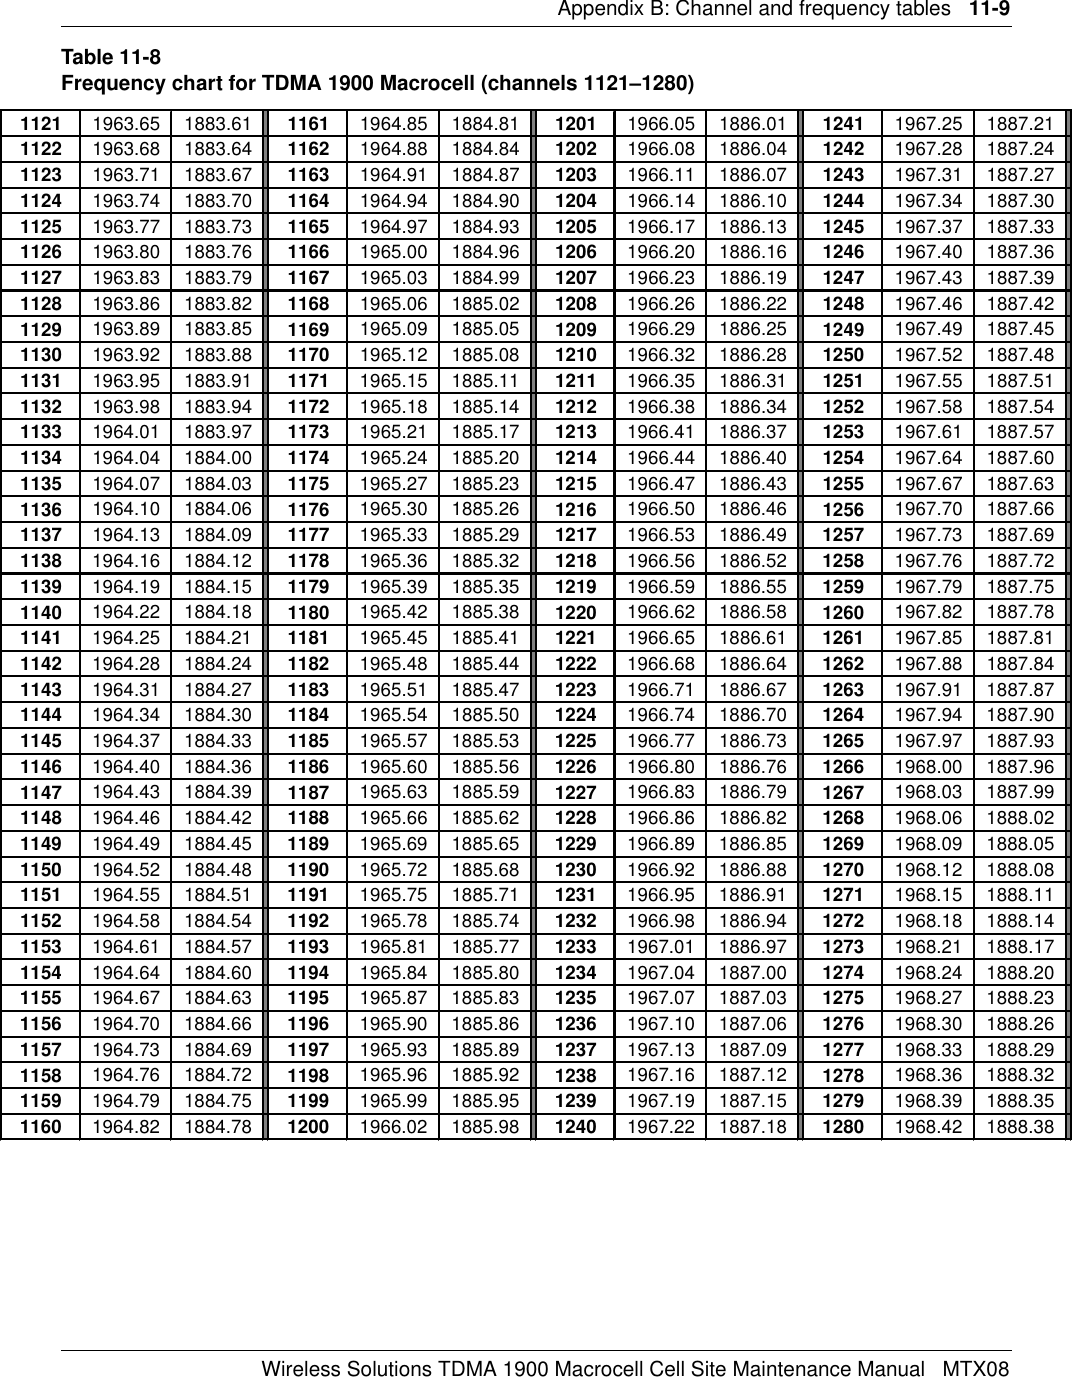 Appendix B: Channel and frequency tables   11-9Wireless Solutions TDMA 1900 Macrocell Cell Site Maintenance Manual   MTX08Table 11-8Frequency chart for TDMA 1900 Macrocell (channels 1121–1280)1121 1963.65 1883.61 1161 1964.85 1884.81 1201 1966.05 1886.01 1241 1967.25 1887.211122 1963.68 1883.64 1162 1964.88 1884.84 1202 1966.08 1886.04 1242 1967.28 1887.241123 1963.71 1883.67 1163 1964.91 1884.87 1203 1966.11 1886.07 1243 1967.31 1887.271124 1963.74 1883.70 1164 1964.94 1884.90 1204 1966.14 1886.10 1244 1967.34 1887.301125 1963.77 1883.73 1165 1964.97 1884.93 1205 1966.17 1886.13 1245 1967.37 1887.331126 1963.80 1883.76 1166 1965.00 1884.96 1206 1966.20 1886.16 1246 1967.40 1887.361127 1963.83 1883.79 1167 1965.03 1884.99 1207 1966.23 1886.19 1247 1967.43 1887.391128 1963.86 1883.82 1168 1965.06 1885.02 1208 1966.26 1886.22 1248 1967.46 1887.421129 1963.89 1883.85 1169 1965.09 1885.05 1209 1966.29 1886.25 1249 1967.49 1887.451130 1963.92 1883.88 1170 1965.12 1885.08 1210 1966.32 1886.28 1250 1967.52 1887.481131 1963.95 1883.91 1171 1965.15 1885.11 1211 1966.35 1886.31 1251 1967.55 1887.511132 1963.98 1883.94 1172 1965.18 1885.14 1212 1966.38 1886.34 1252 1967.58 1887.541133 1964.01 1883.97 1173 1965.21 1885.17 1213 1966.41 1886.37 1253 1967.61 1887.571134 1964.04 1884.00 1174 1965.24 1885.20 1214 1966.44 1886.40 1254 1967.64 1887.601135 1964.07 1884.03 1175 1965.27 1885.23 1215 1966.47 1886.43 1255 1967.67 1887.631136 1964.10 1884.06 1176 1965.30 1885.26 1216 1966.50 1886.46 1256 1967.70 1887.661137 1964.13 1884.09 1177 1965.33 1885.29 1217 1966.53 1886.49 1257 1967.73 1887.691138 1964.16 1884.12 1178 1965.36 1885.32 1218 1966.56 1886.52 1258 1967.76 1887.721139 1964.19 1884.15 1179 1965.39 1885.35 1219 1966.59 1886.55 1259 1967.79 1887.751140 1964.22 1884.18 1180 1965.42 1885.38 1220 1966.62 1886.58 1260 1967.82 1887.781141 1964.25 1884.21 1181 1965.45 1885.41 1221 1966.65 1886.61 1261 1967.85 1887.811142 1964.28 1884.24 1182 1965.48 1885.44 1222 1966.68 1886.64 1262 1967.88 1887.841143 1964.31 1884.27 1183 1965.51 1885.47 1223 1966.71 1886.67 1263 1967.91 1887.871144 1964.34 1884.30 1184 1965.54 1885.50 1224 1966.74 1886.70 1264 1967.94 1887.901145 1964.37 1884.33 1185 1965.57 1885.53 1225 1966.77 1886.73 1265 1967.97 1887.931146 1964.40 1884.36 1186 1965.60 1885.56 1226 1966.80 1886.76 1266 1968.00 1887.961147 1964.43 1884.39 1187 1965.63 1885.59 1227 1966.83 1886.79 1267 1968.03 1887.991148 1964.46 1884.42 1188 1965.66 1885.62 1228 1966.86 1886.82 1268 1968.06 1888.021149 1964.49 1884.45 1189 1965.69 1885.65 1229 1966.89 1886.85 1269 1968.09 1888.051150 1964.52 1884.48 1190 1965.72 1885.68 1230 1966.92 1886.88 1270 1968.12 1888.081151 1964.55 1884.51 1191 1965.75 1885.71 1231 1966.95 1886.91 1271 1968.15 1888.111152 1964.58 1884.54 1192 1965.78 1885.74 1232 1966.98 1886.94 1272 1968.18 1888.141153 1964.61 1884.57 1193 1965.81 1885.77 1233 1967.01 1886.97 1273 1968.21 1888.171154 1964.64 1884.60 1194 1965.84 1885.80 1234 1967.04 1887.00 1274 1968.24 1888.201155 1964.67 1884.63 1195 1965.87 1885.83 1235 1967.07 1887.03 1275 1968.27 1888.231156 1964.70 1884.66 1196 1965.90 1885.86 1236 1967.10 1887.06 1276 1968.30 1888.261157 1964.73 1884.69 1197 1965.93 1885.89 1237 1967.13 1887.09 1277 1968.33 1888.291158 1964.76 1884.72 1198 1965.96 1885.92 1238 1967.16 1887.12 1278 1968.36 1888.321159 1964.79 1884.75 1199 1965.99 1885.95 1239 1967.19 1887.15 1279 1968.39 1888.351160 1964.82 1884.78 1200 1966.02 1885.98 1240 1967.22 1887.18 1280 1968.42 1888.38